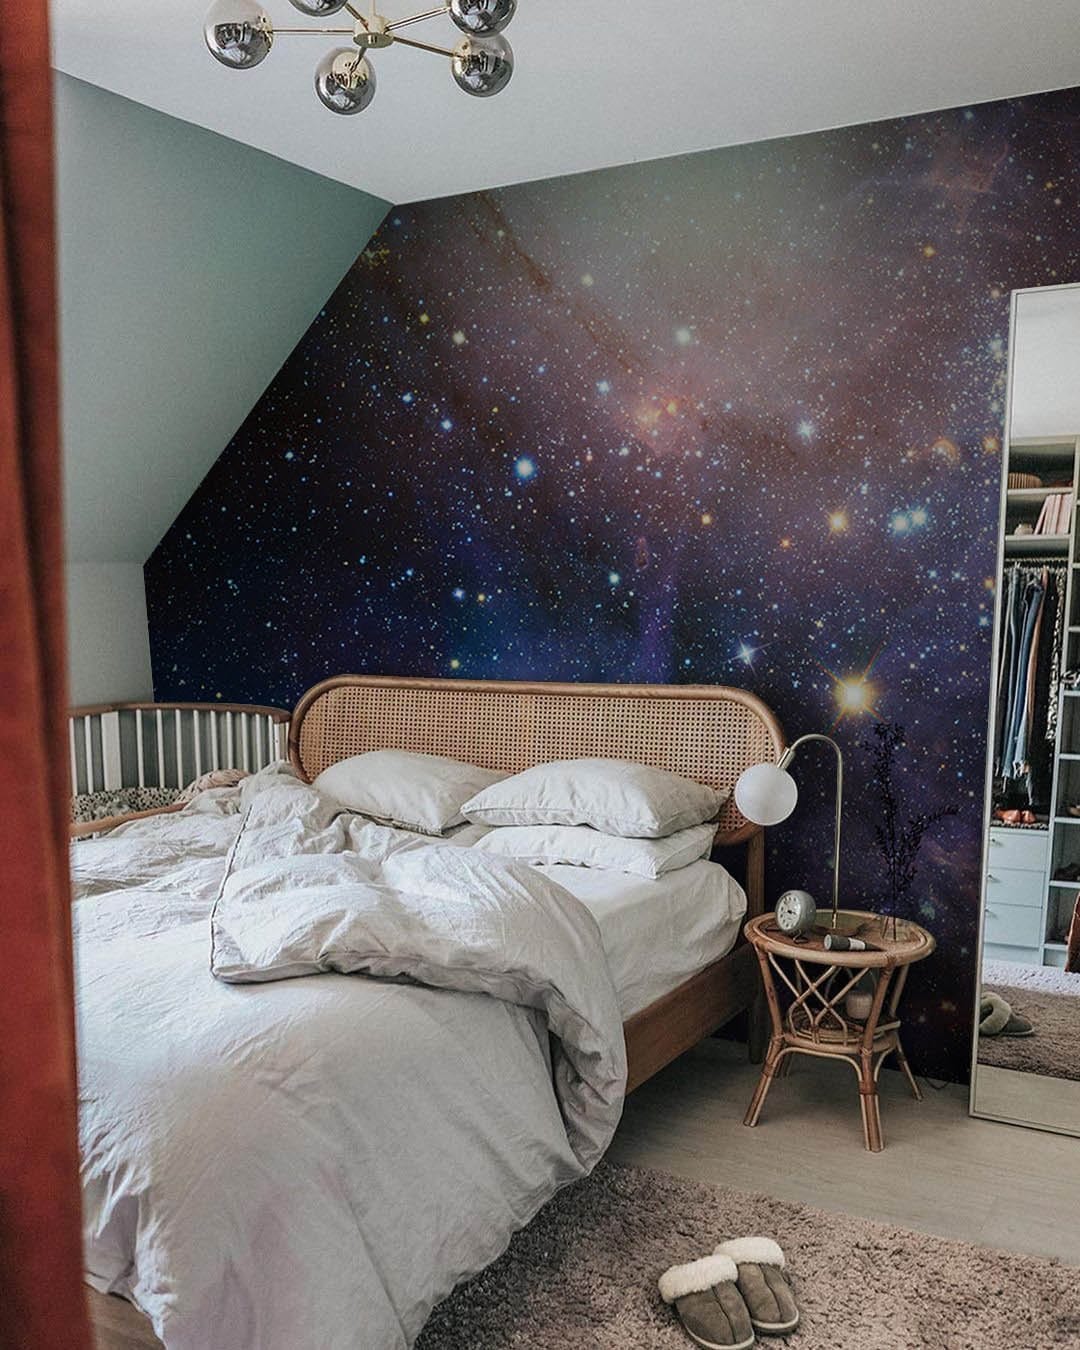 Wallpaper mural for the bedroom that features a lovely purple galaxy.